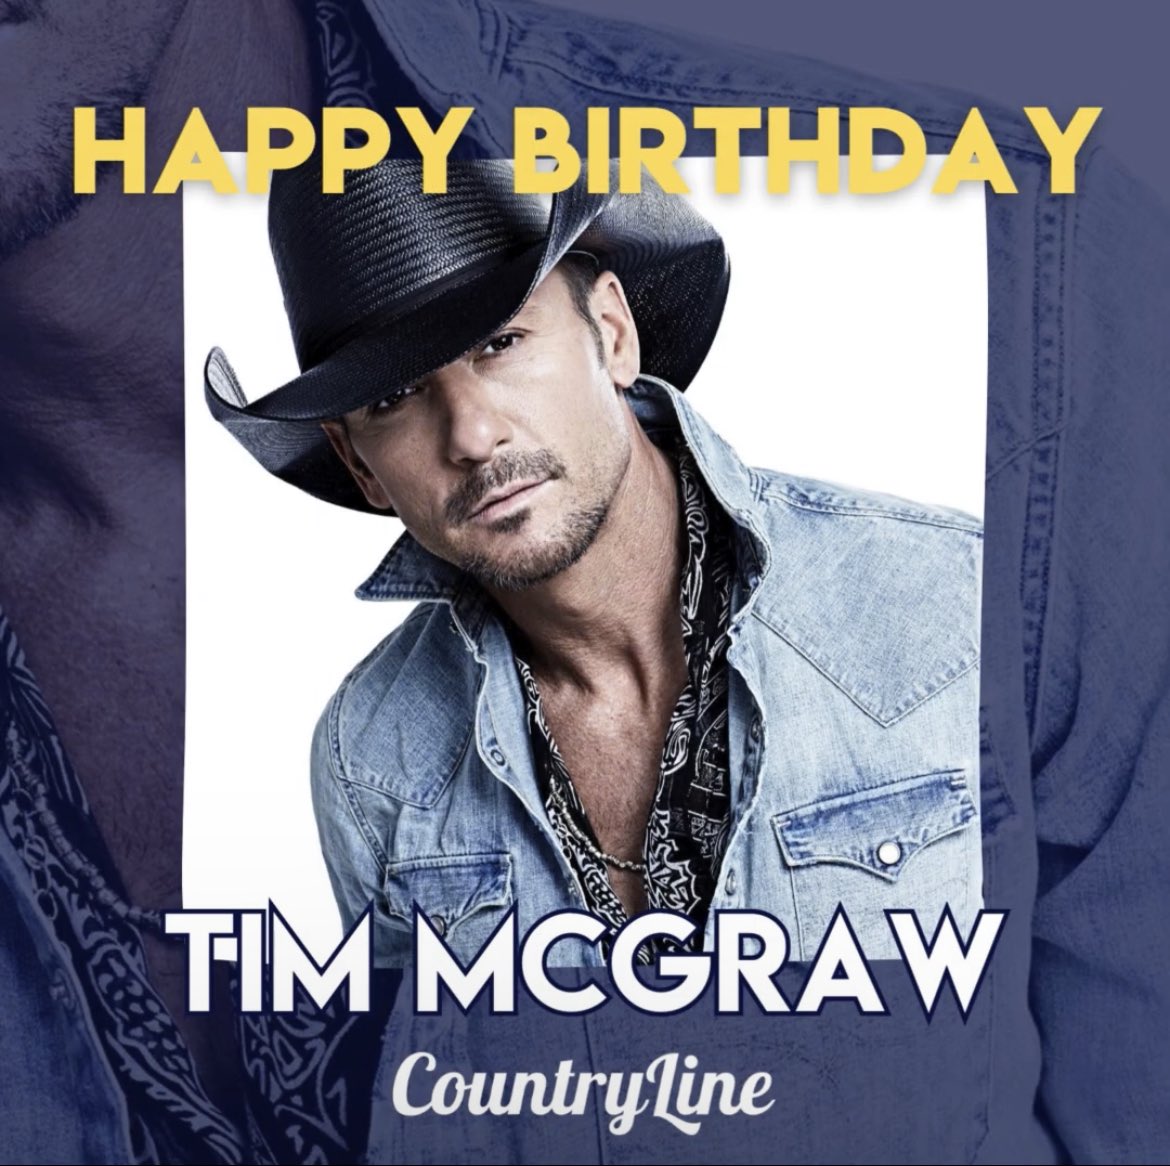 Happy birthday @TheTimMcGraw! 🎉 Let us know your favourite Tim McGraw song in the comments! 🎶